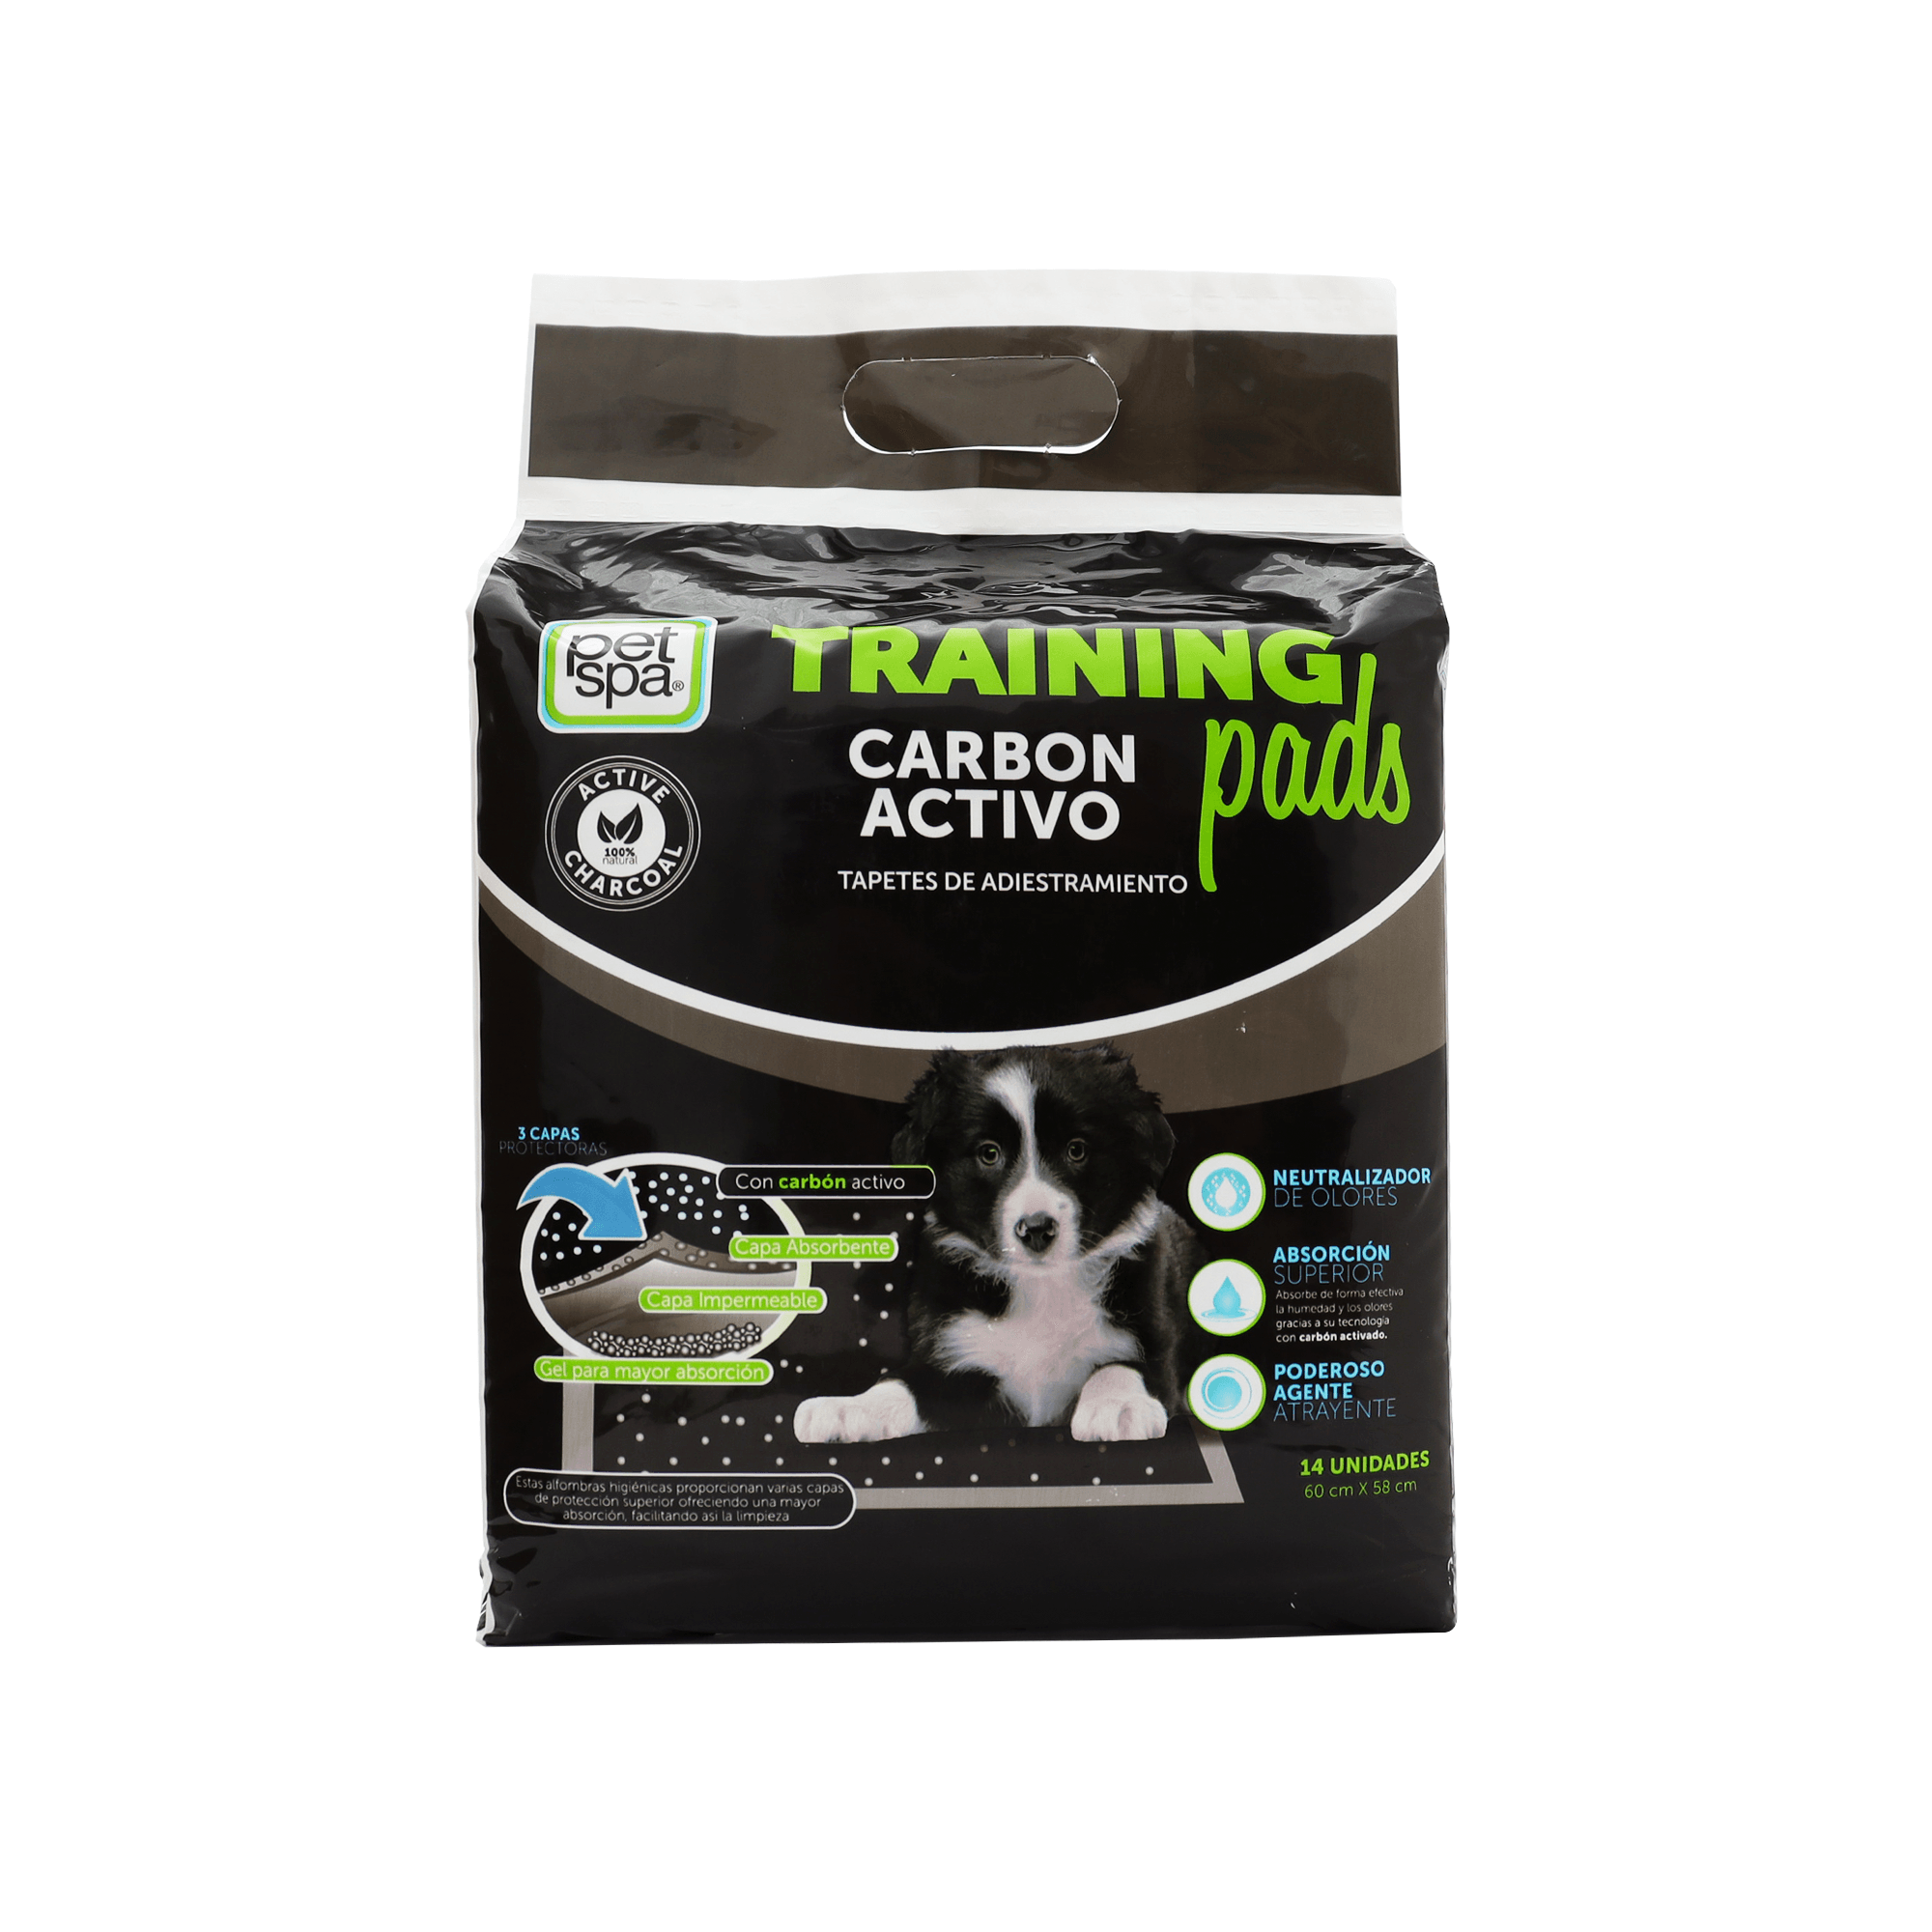 Tapete Para Perros Trainning Pads Carbon Activo 14 Unidades